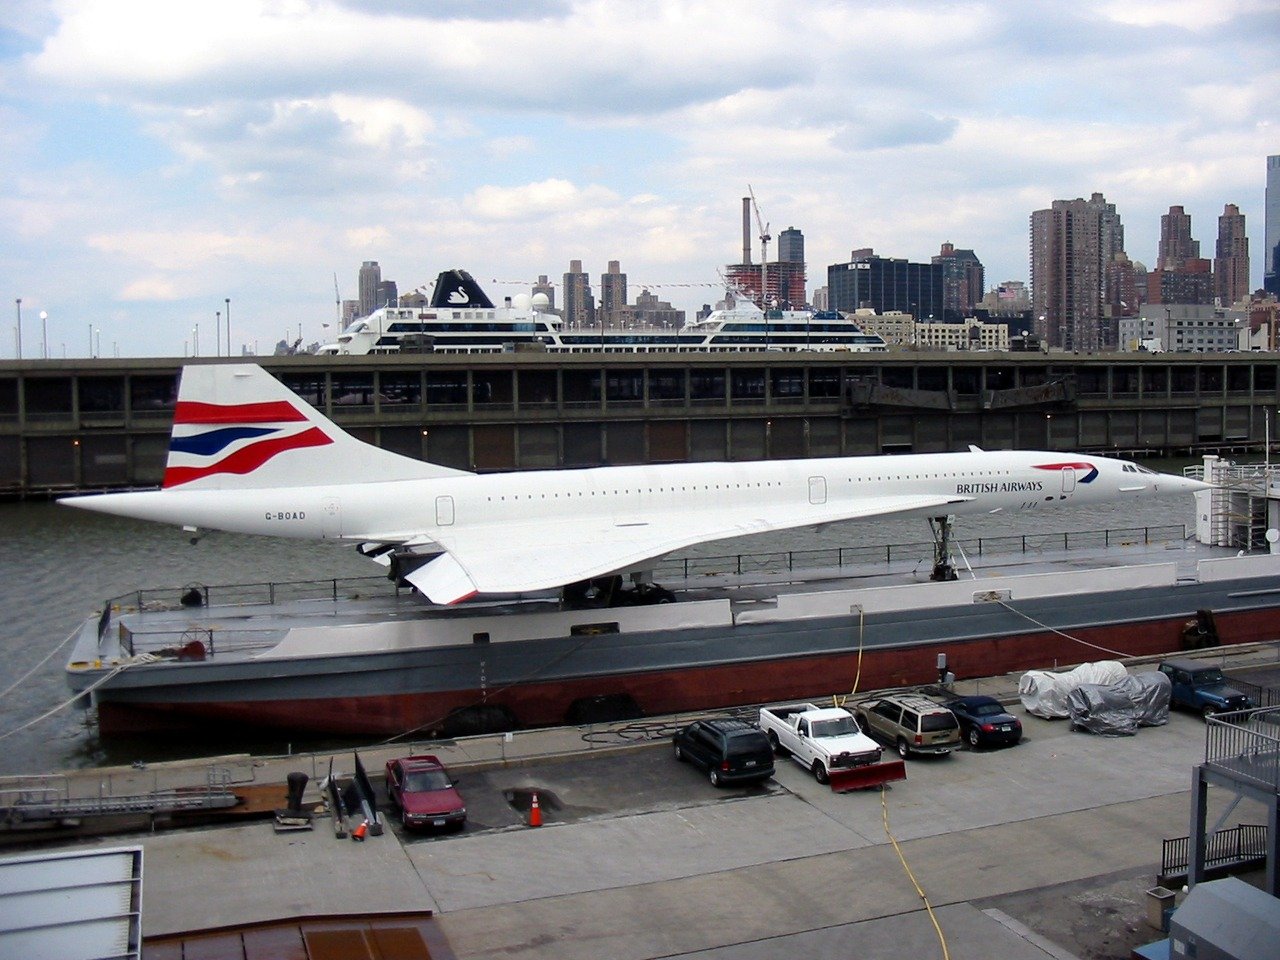 Concorde, passenger plane that could travel faster than the speed of sound